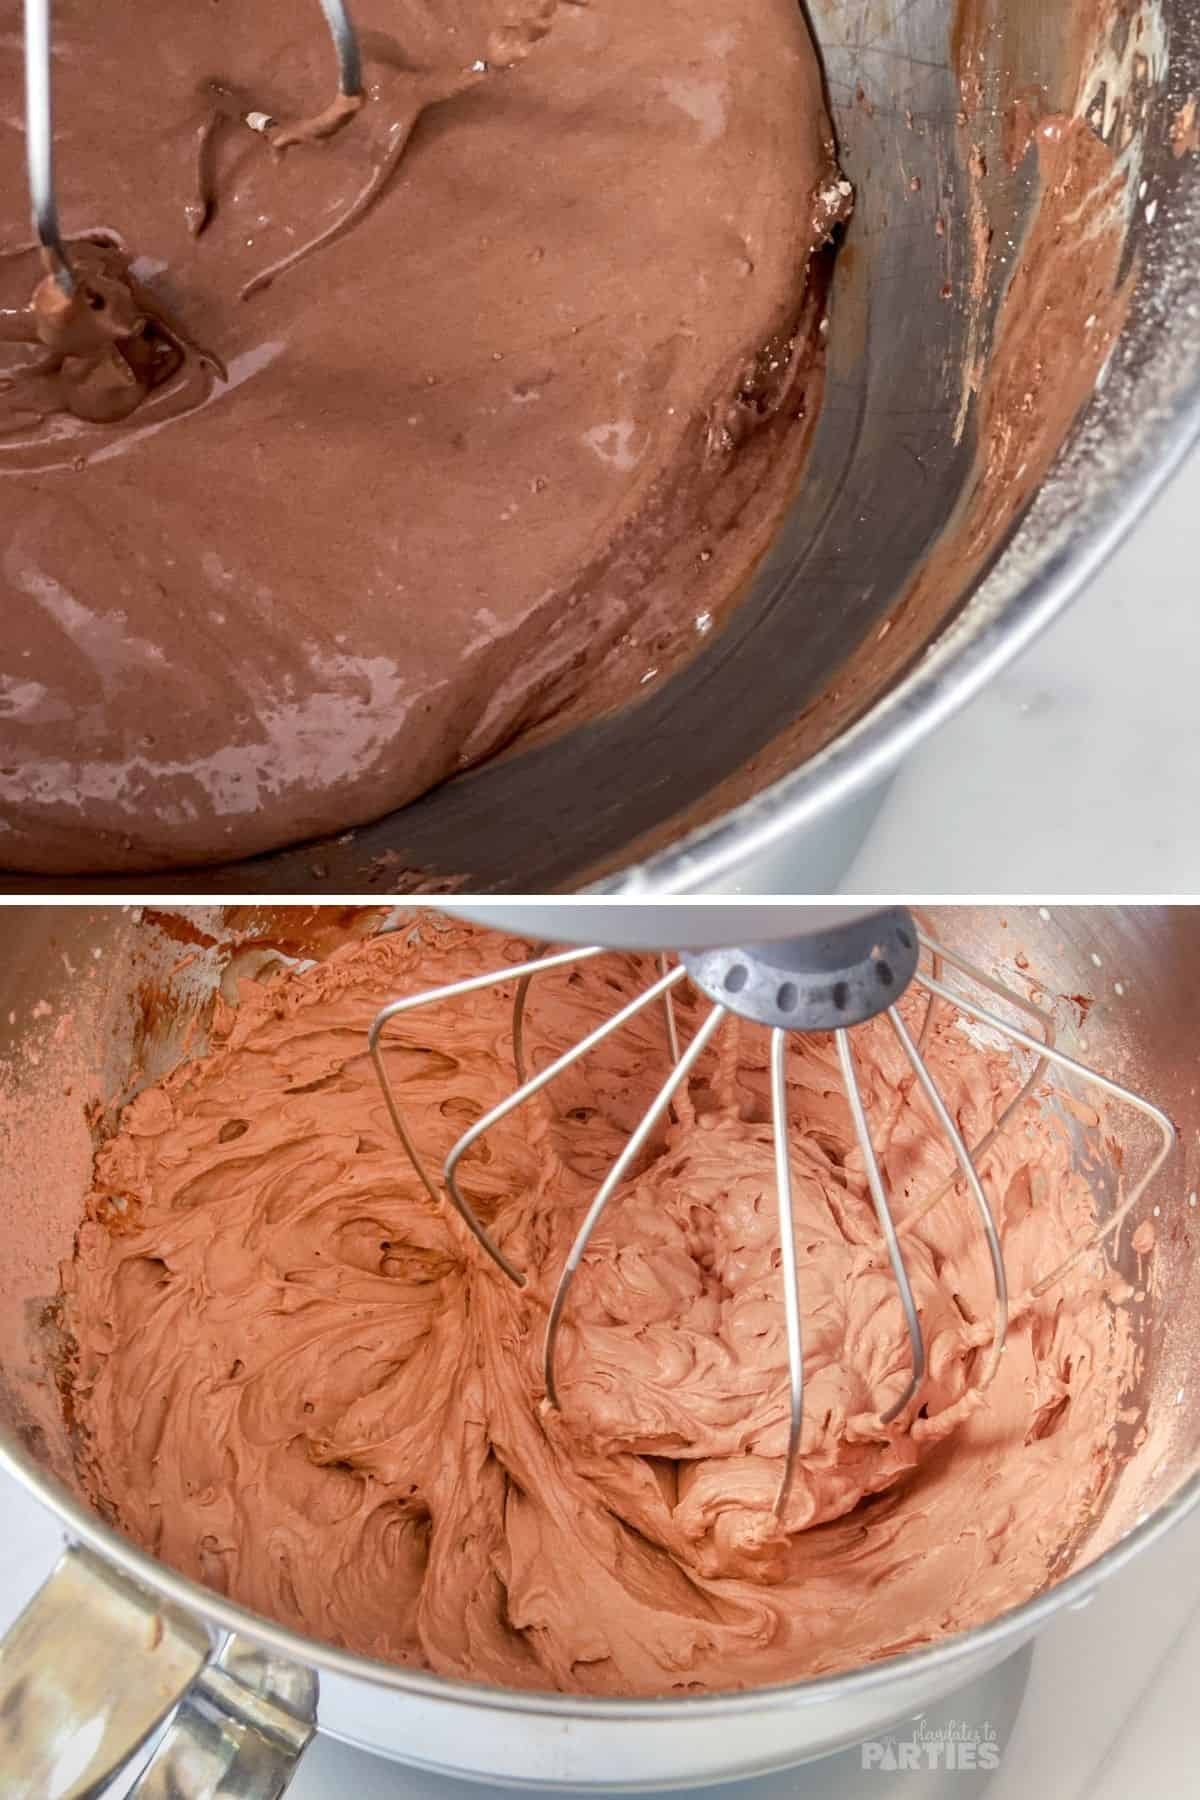 Chocolate whipped cream in a mixer.